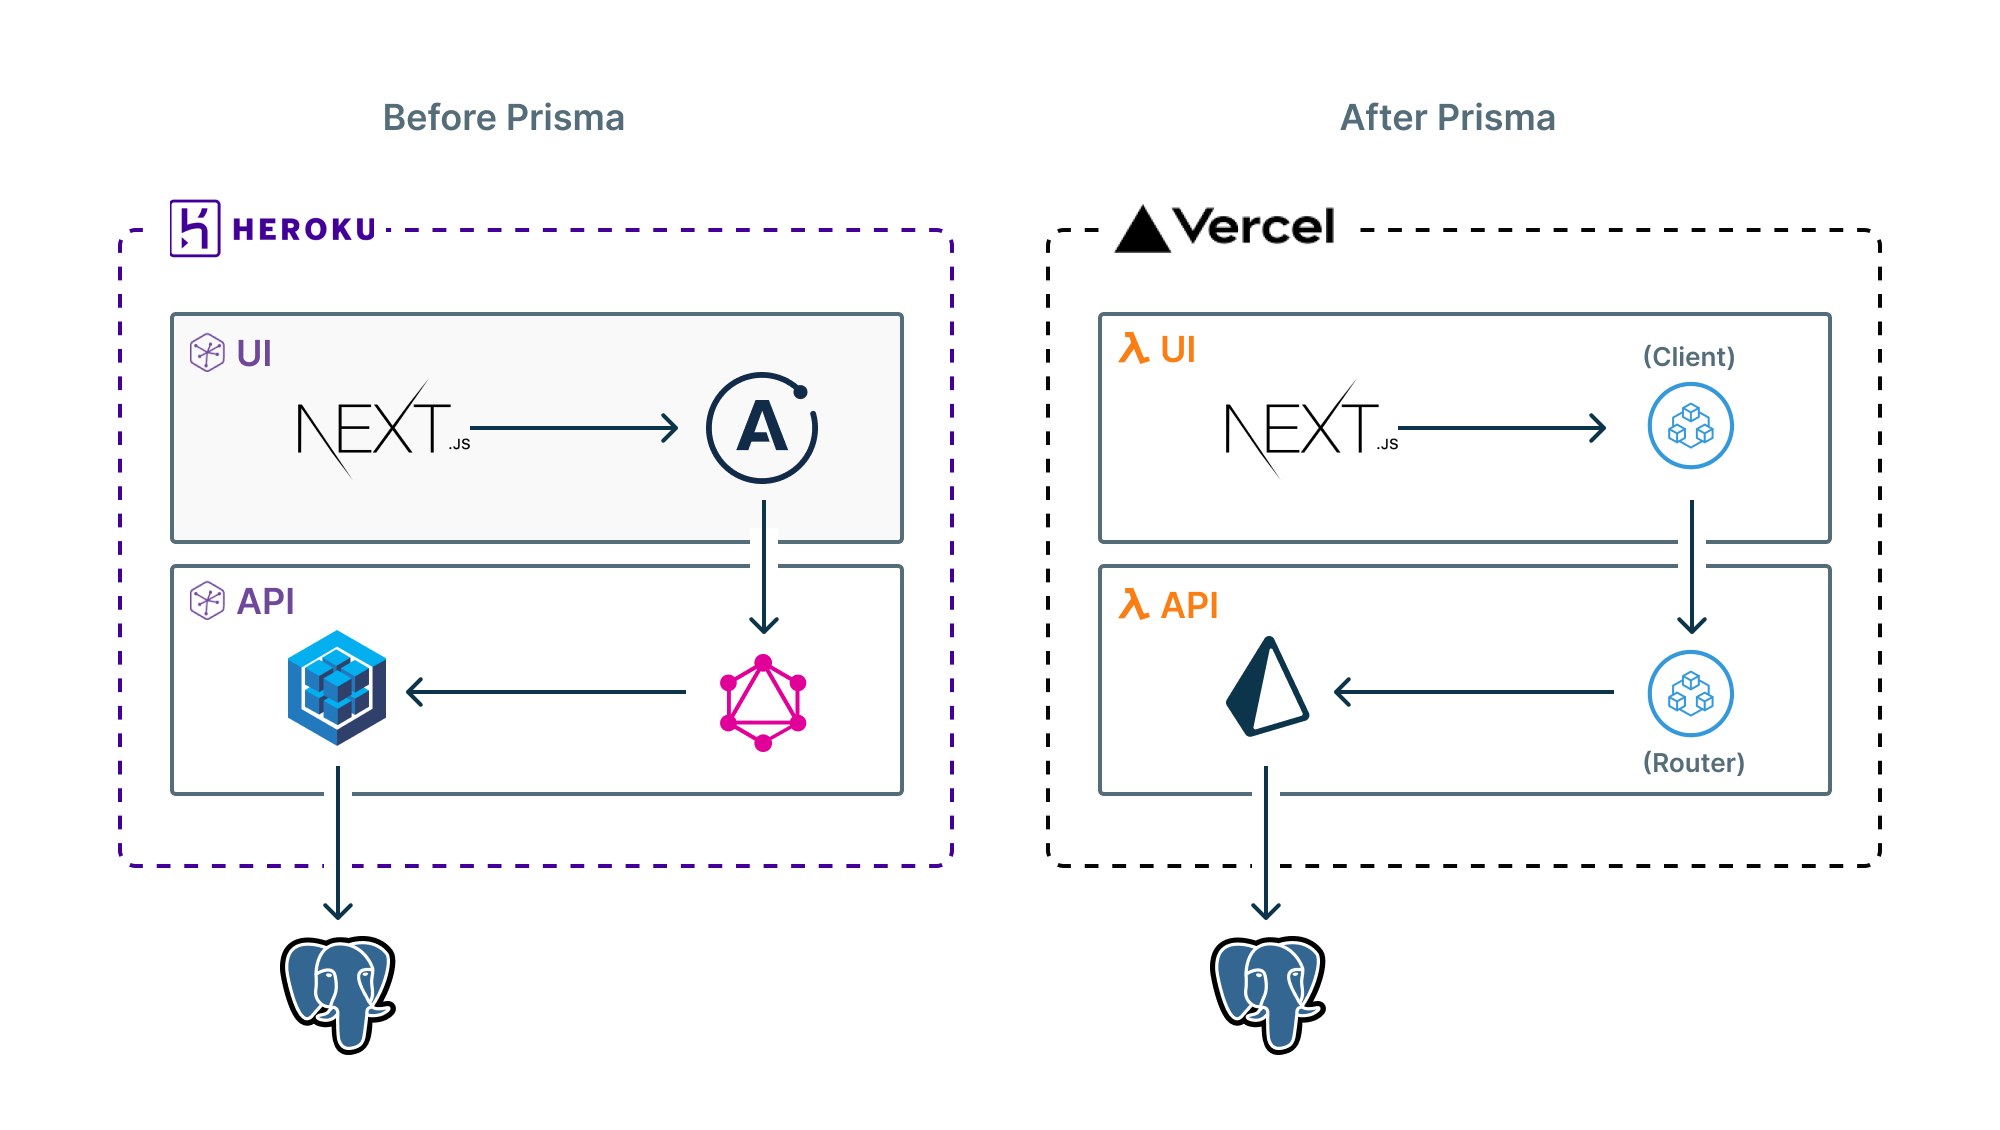 Invisible's tech stack before and after Prisma